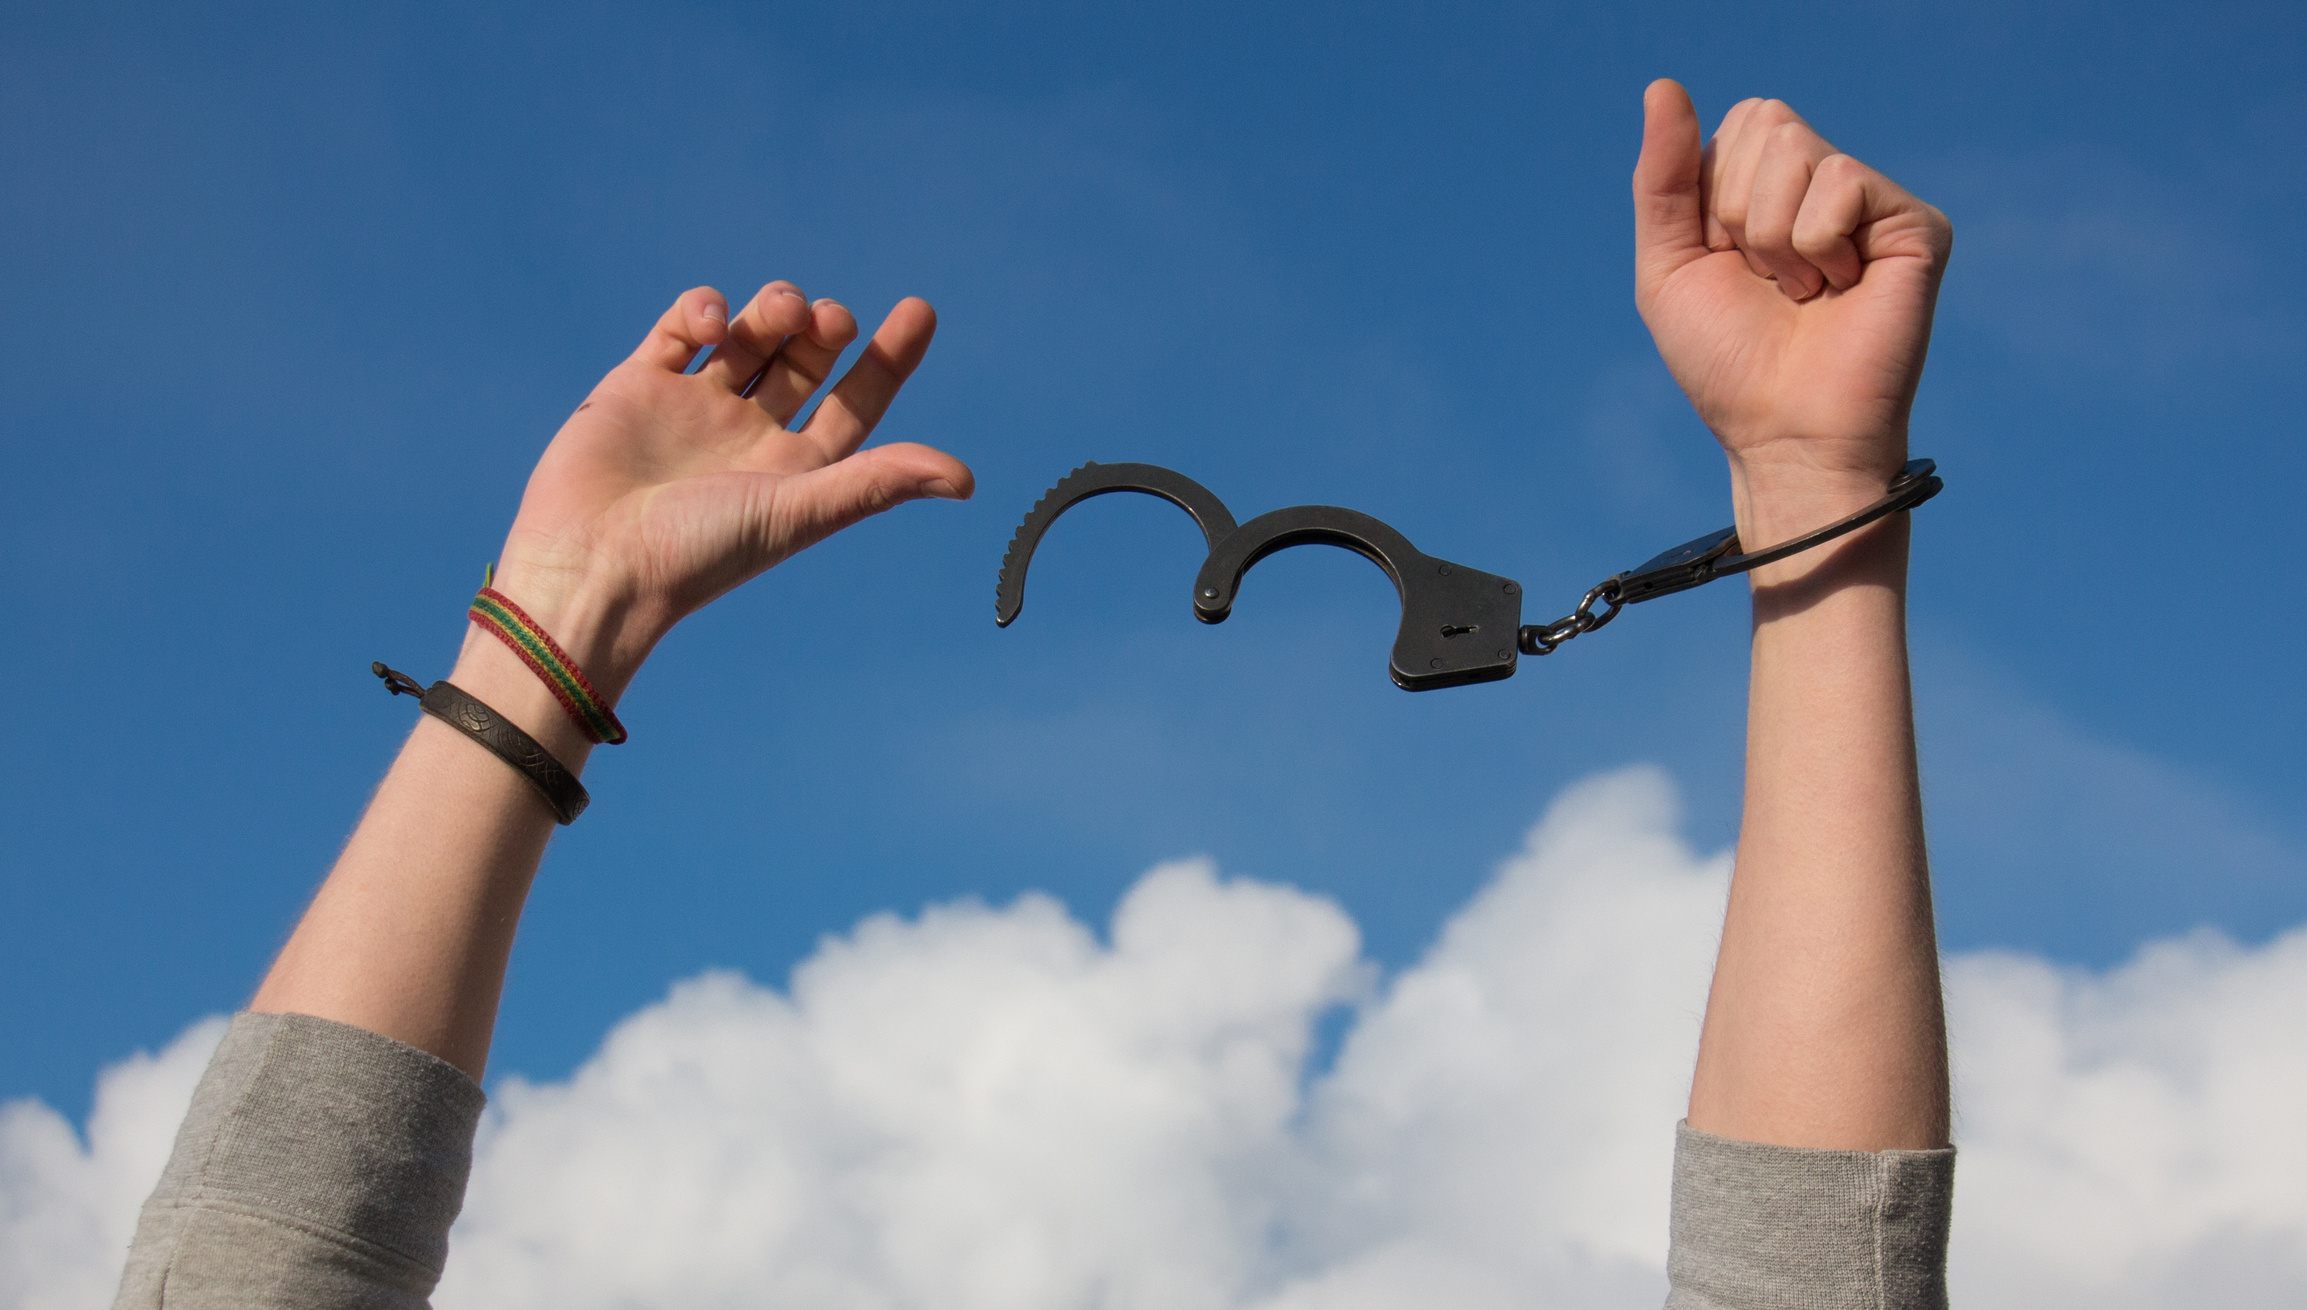 Hands in Handcuffs on Sky Background